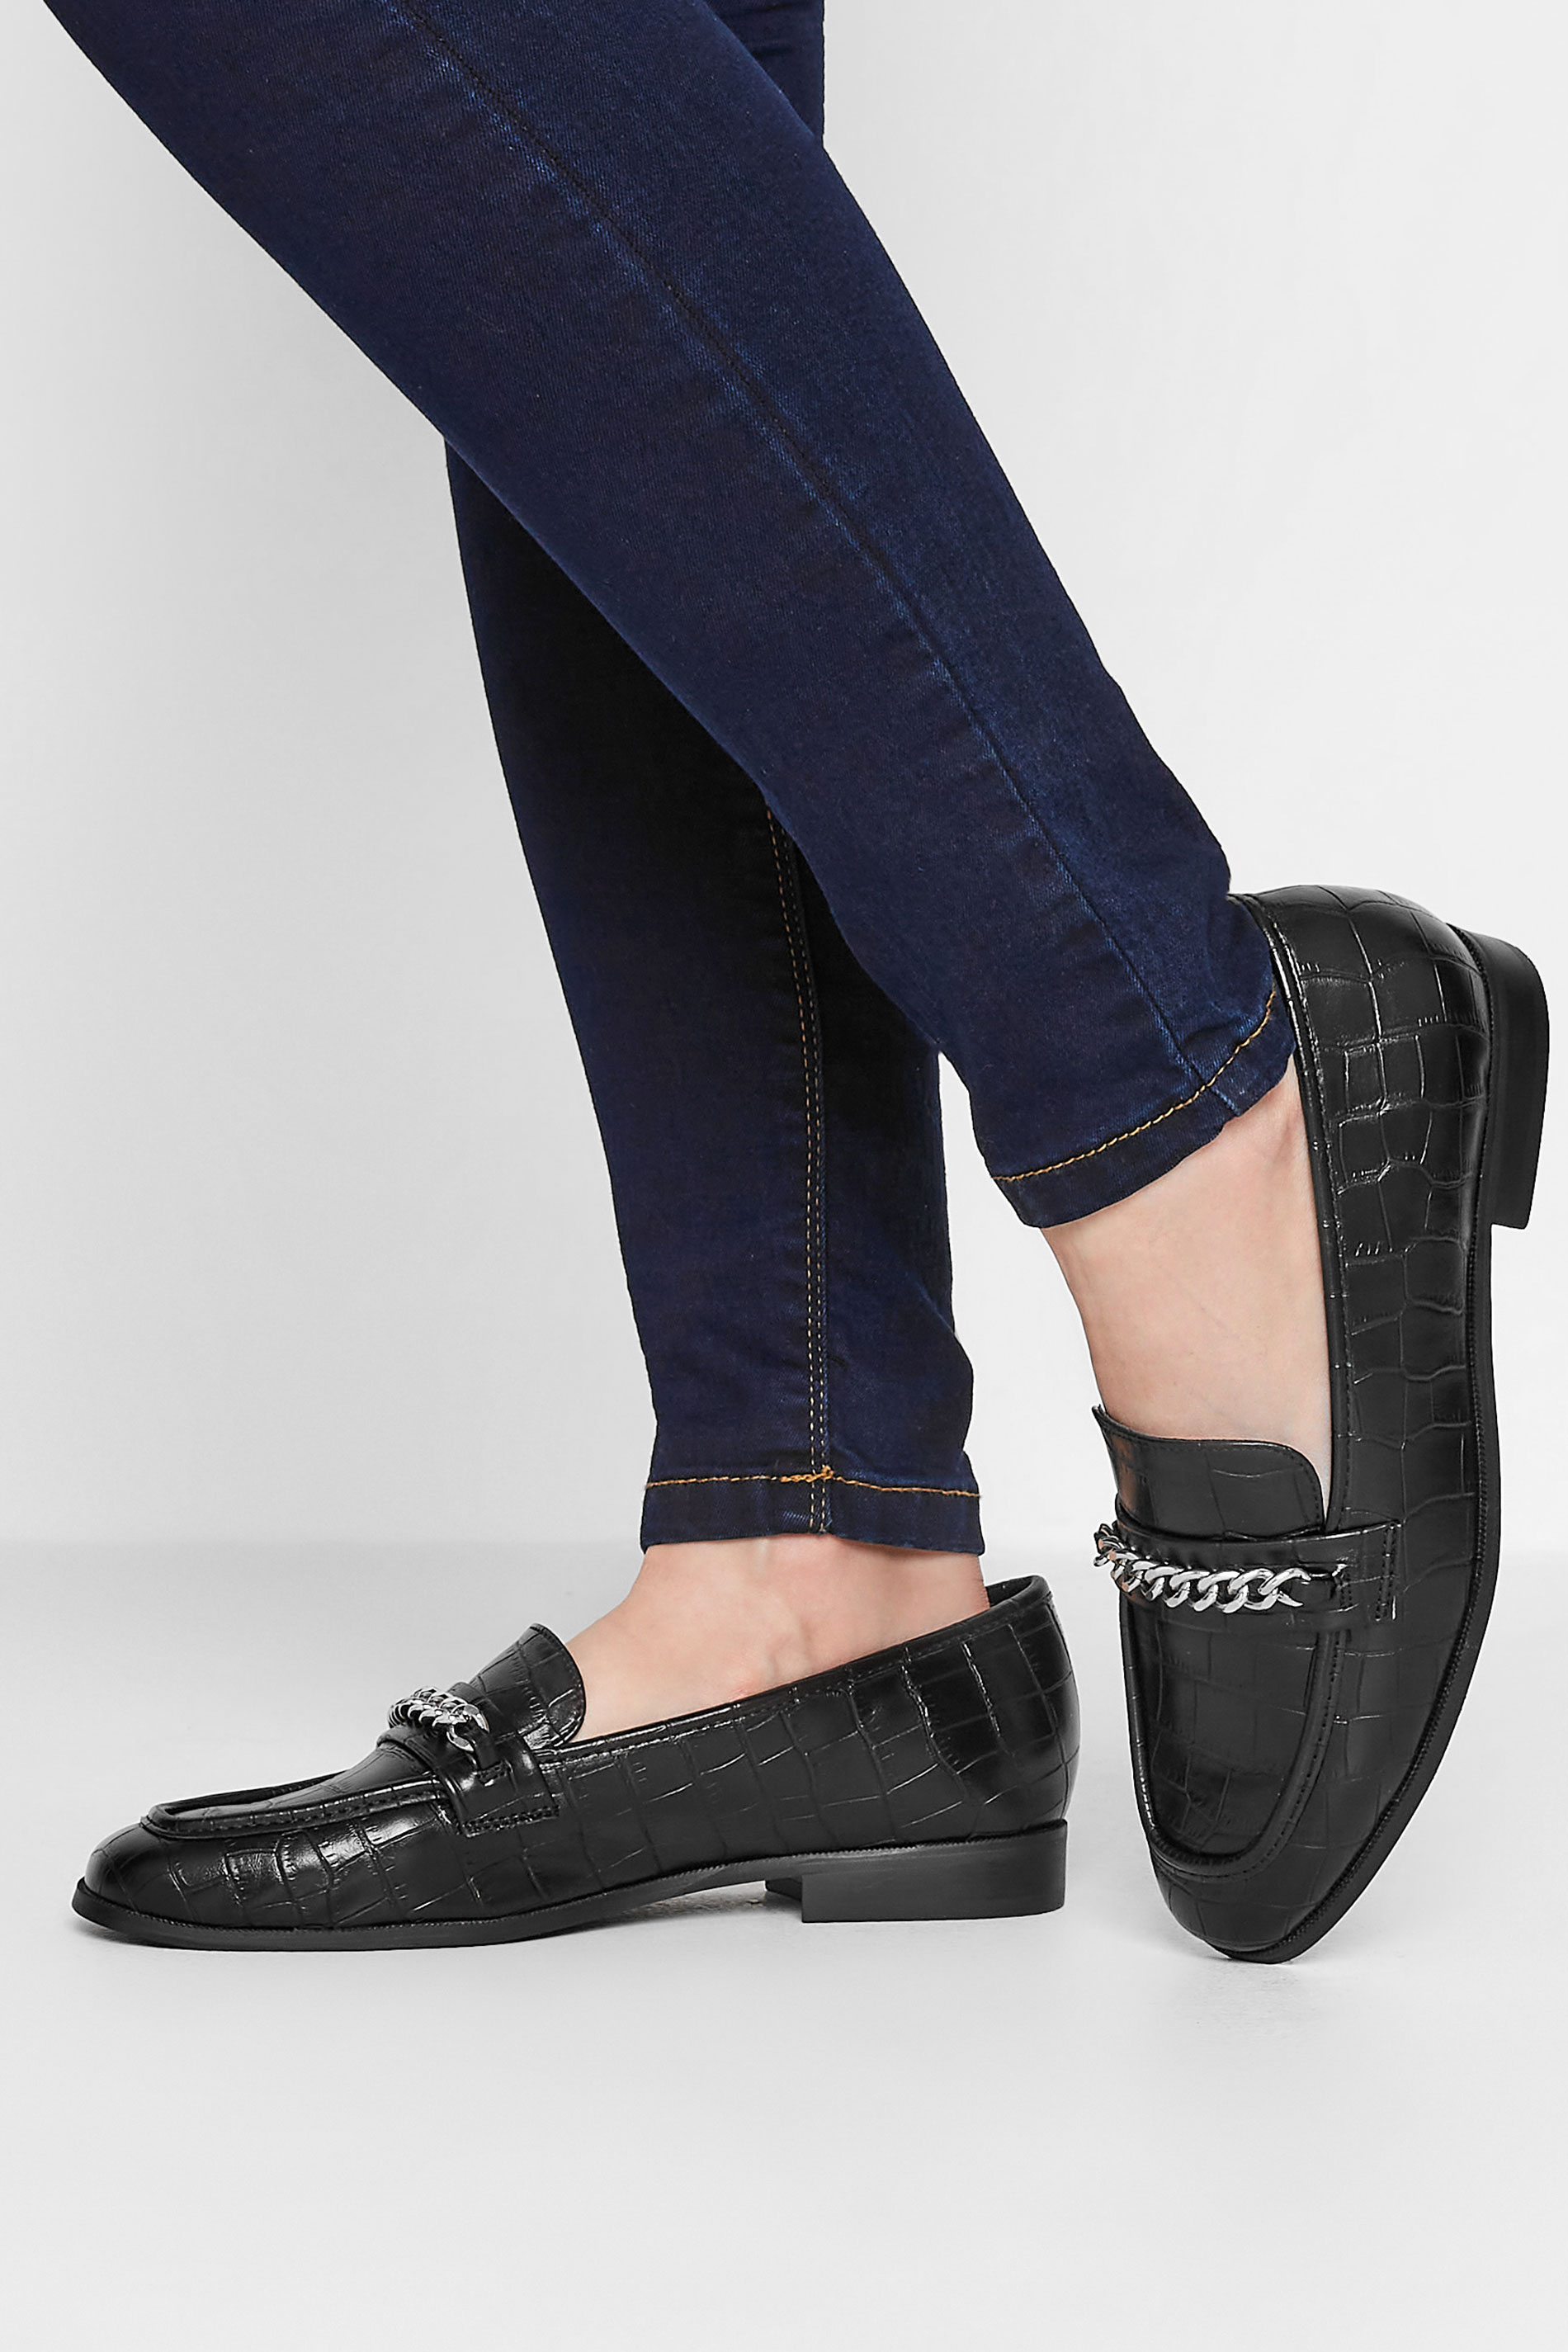 LTS Black Croc Chain Detail Loafers In Standard D Fit | Long Tall Sally  1